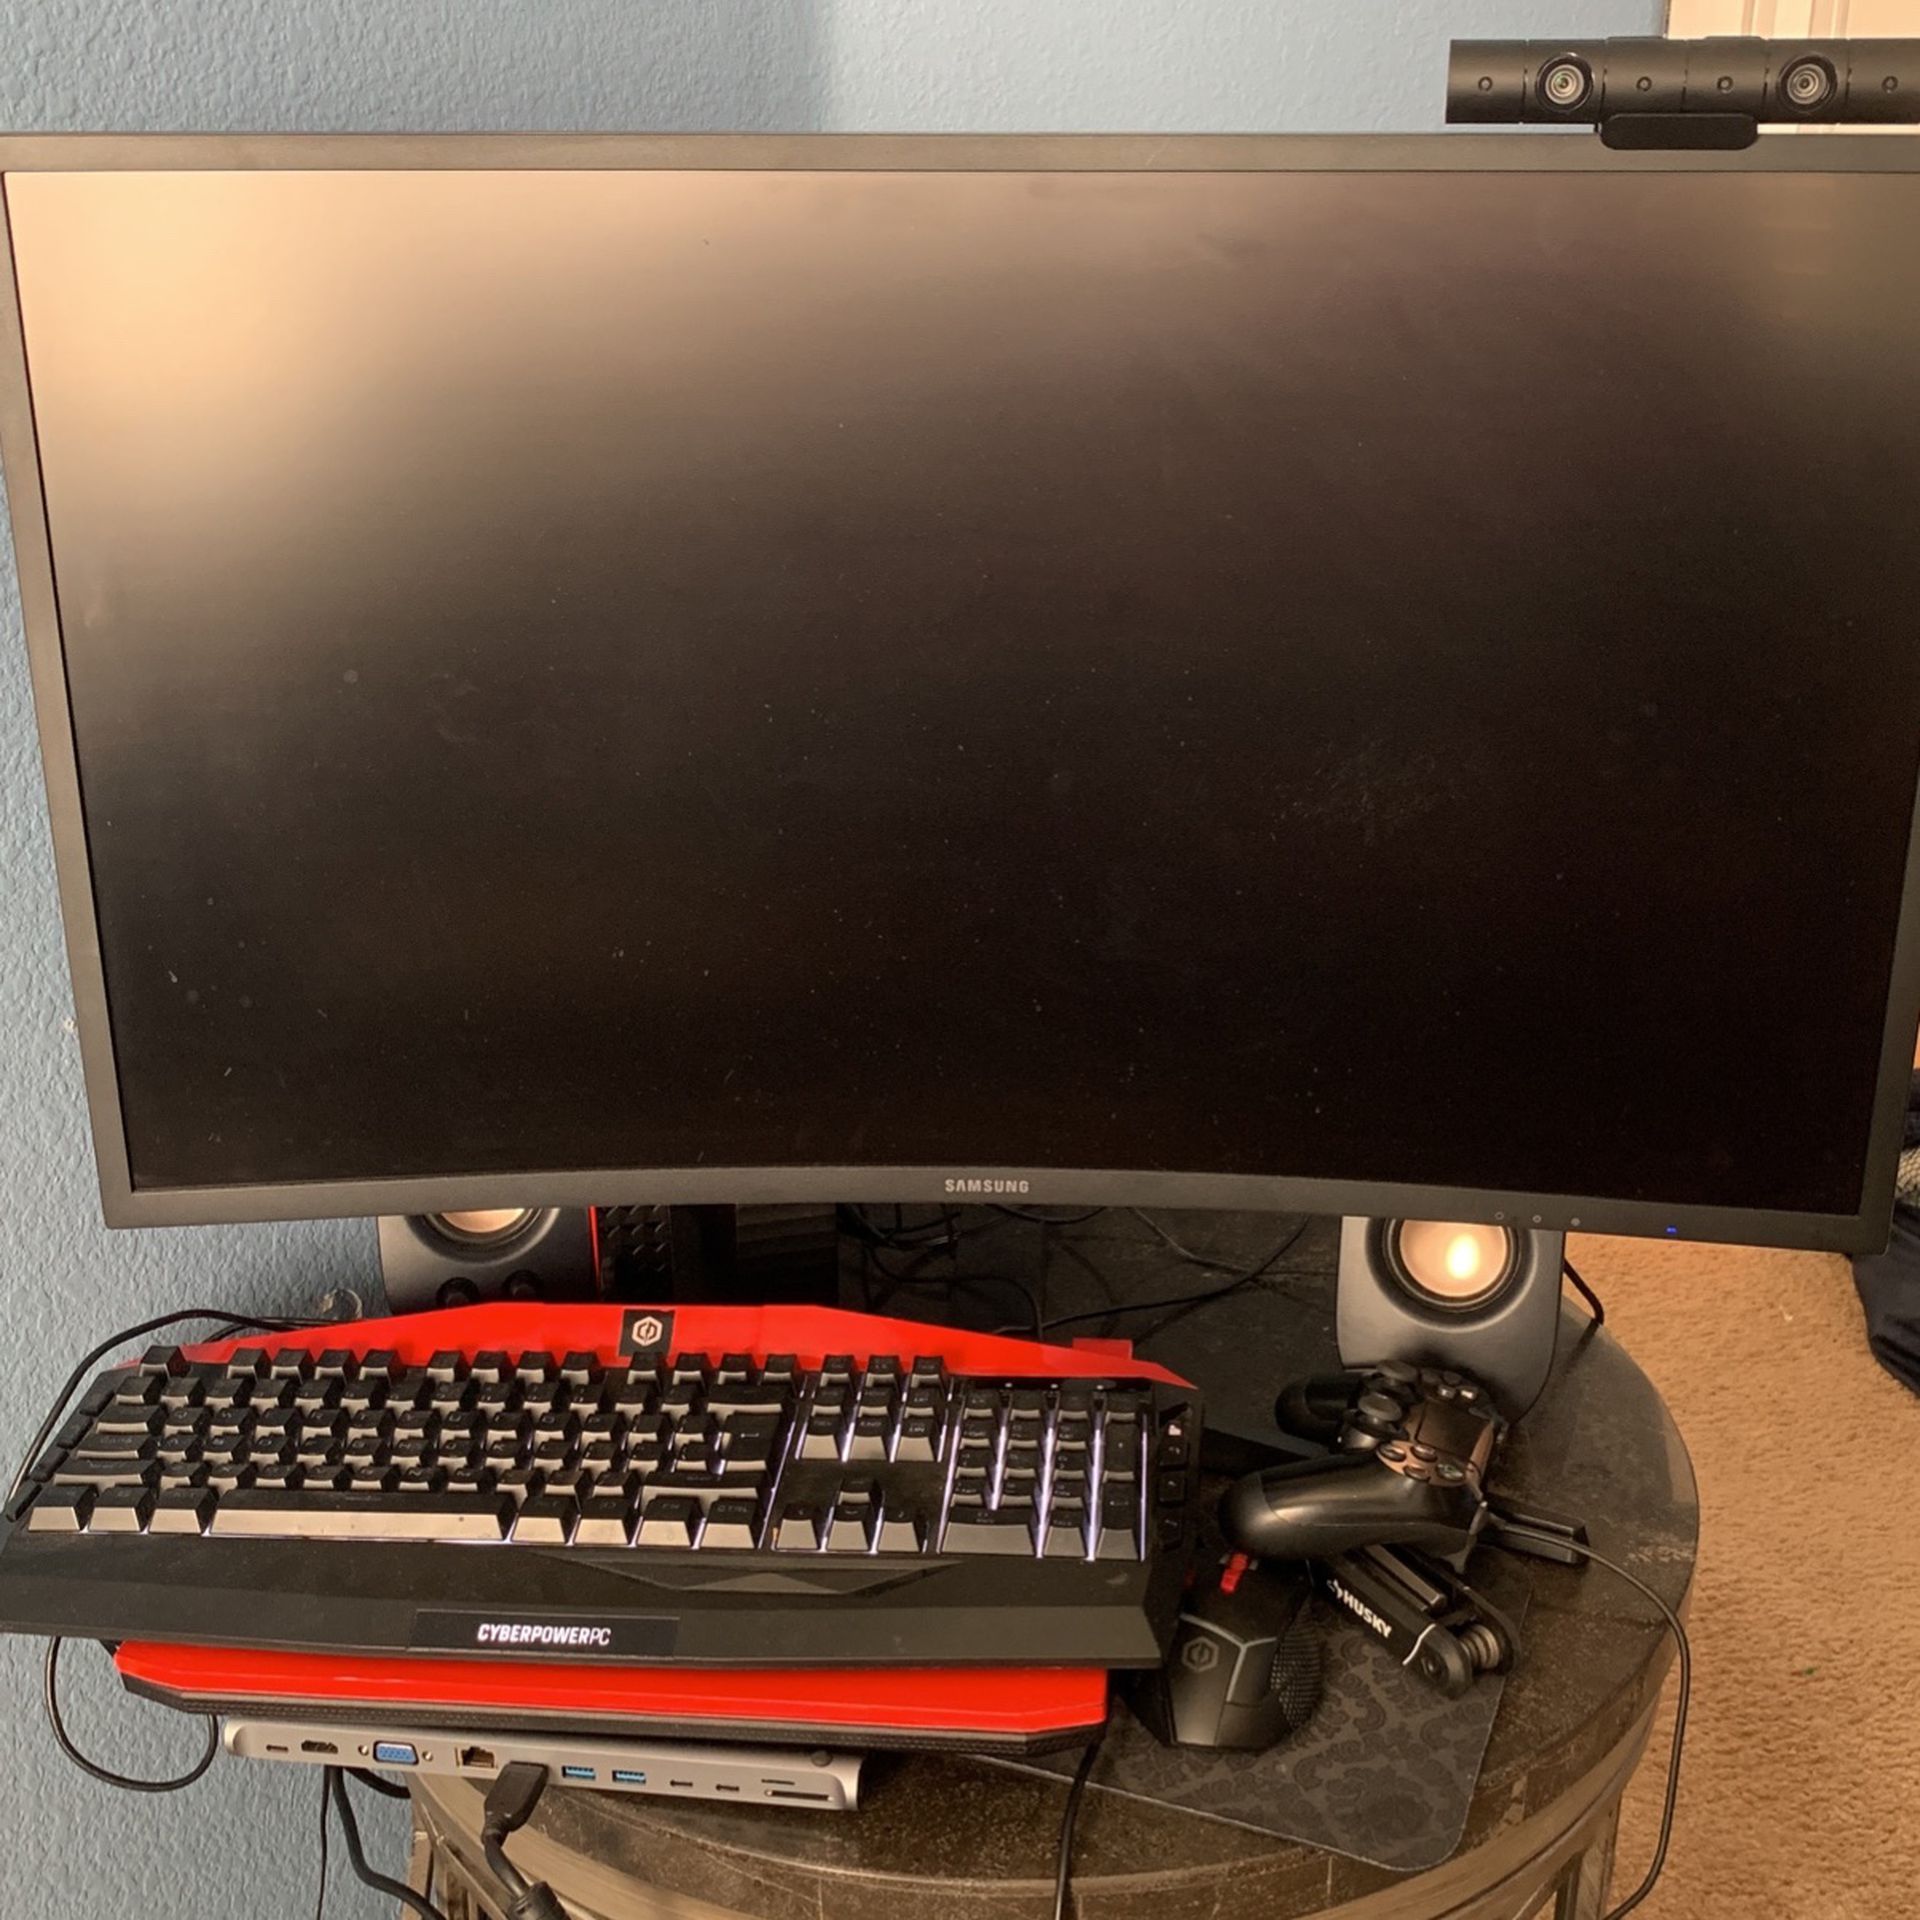 32" Curved Gaming Monitor